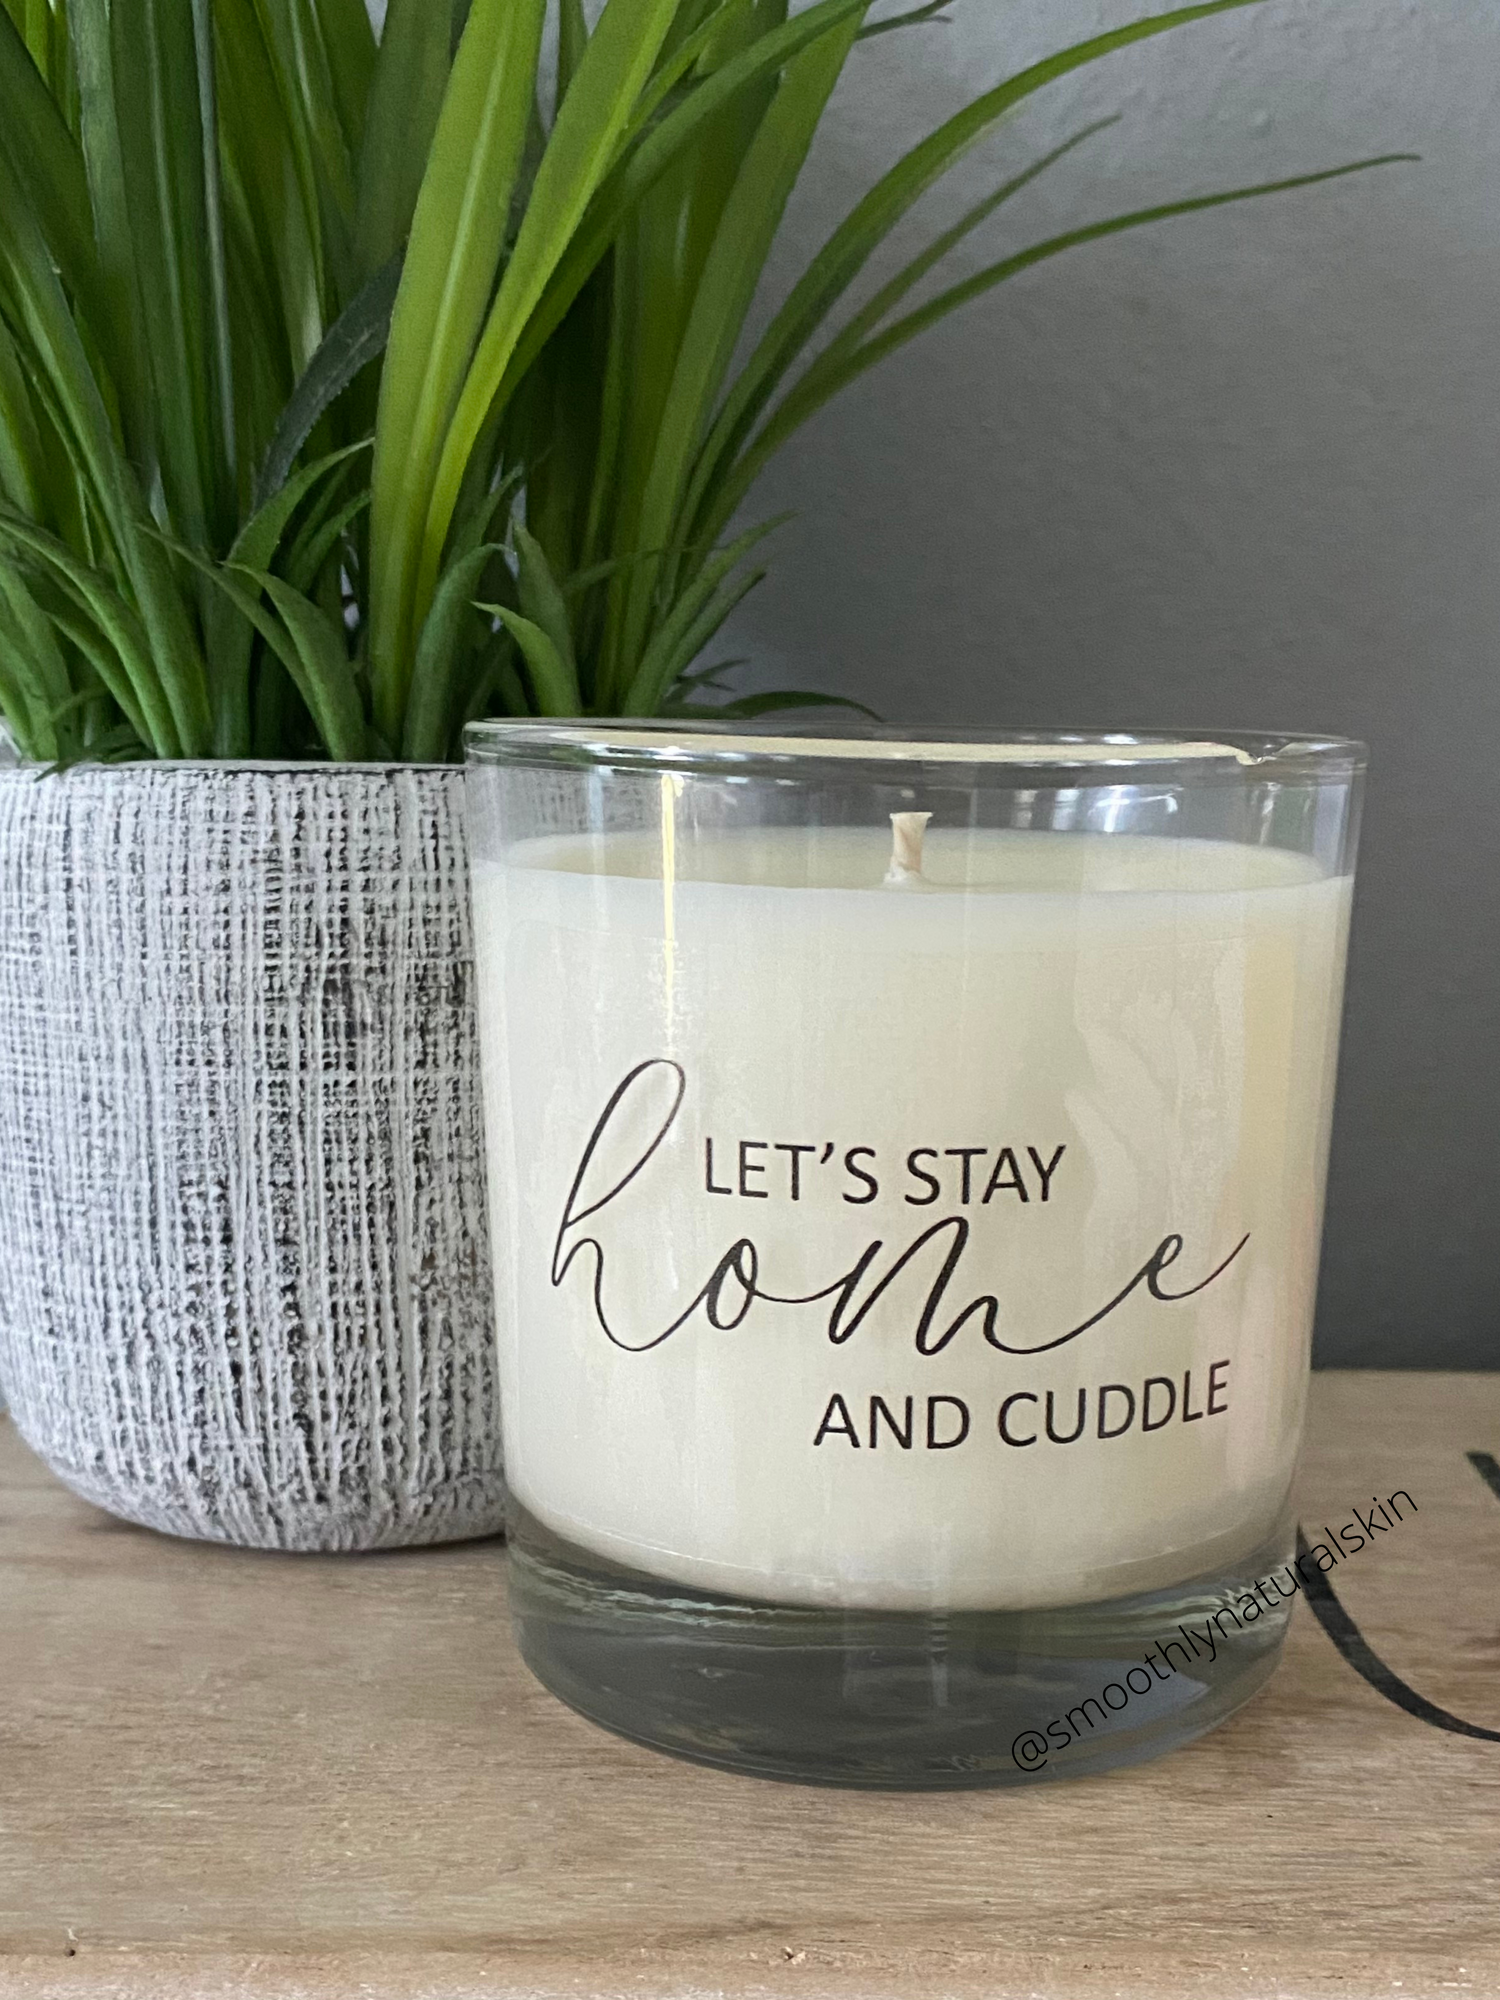 Let's stay home and cuddle candle, is a perfect gift for that special person in your life. These unique candles are hand poured in small batches using natural soy wax, cotton wick (Lead & Zinc Free) and phthalate free fragrance. Smoothly Natural Skin 